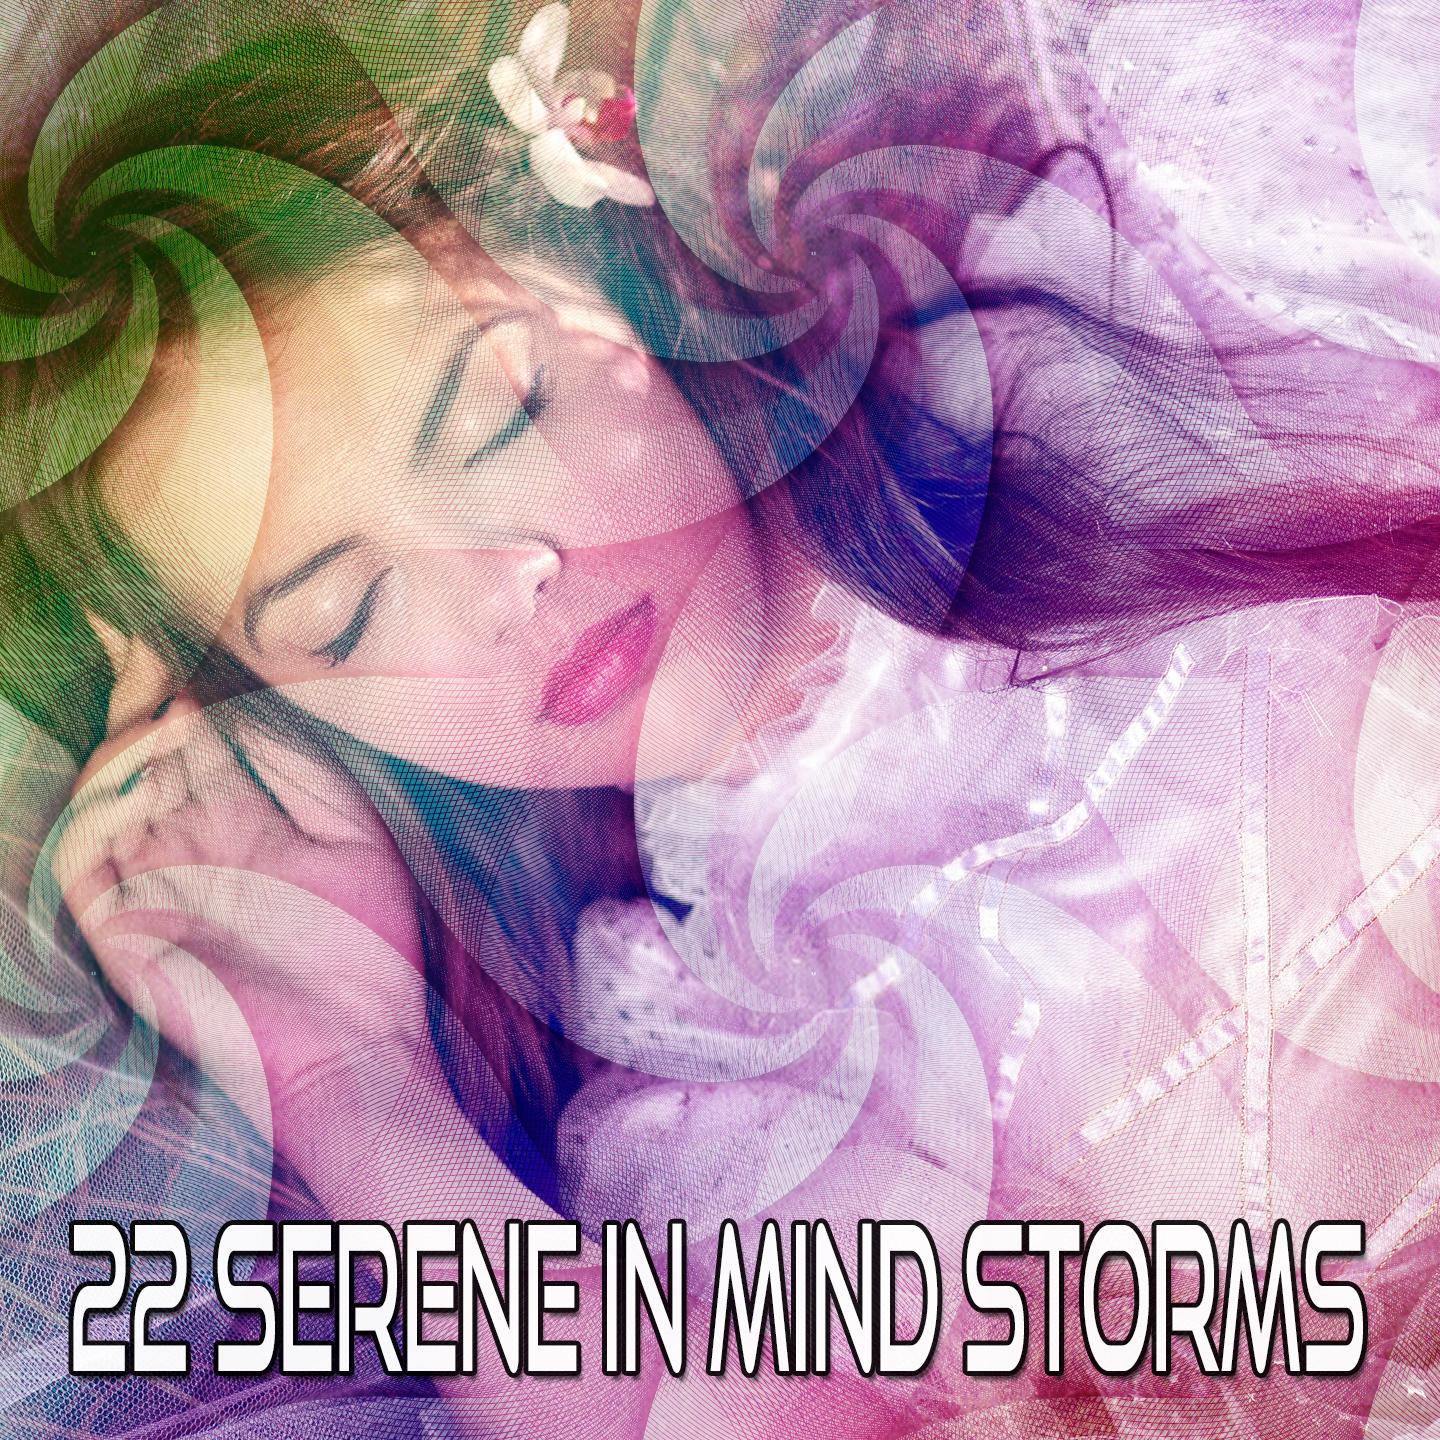 22 Serene in Mind Storms